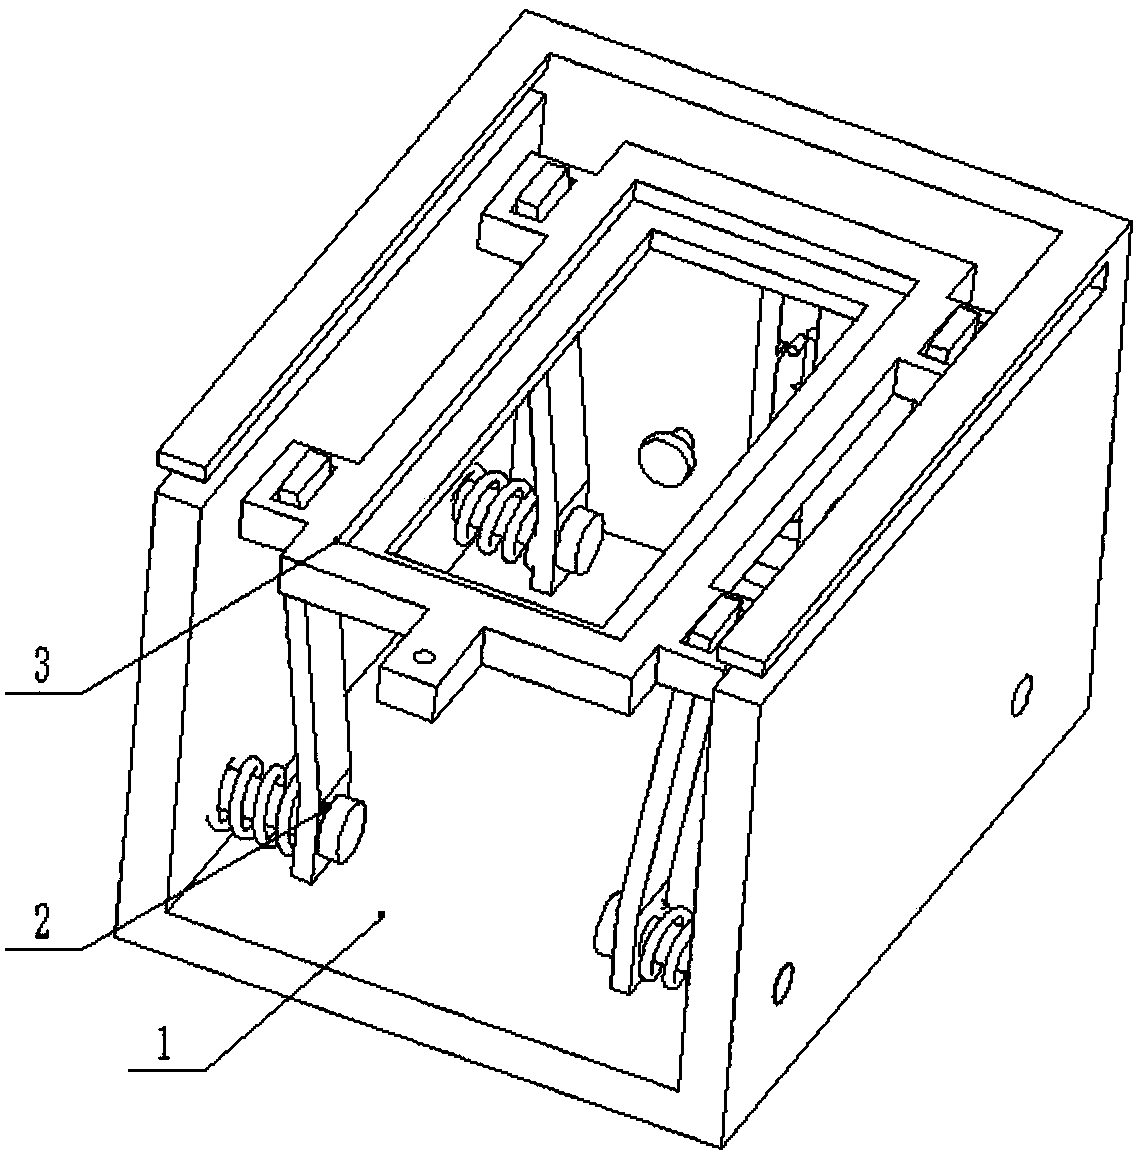 Computer mainframe box transportation and placing protection device